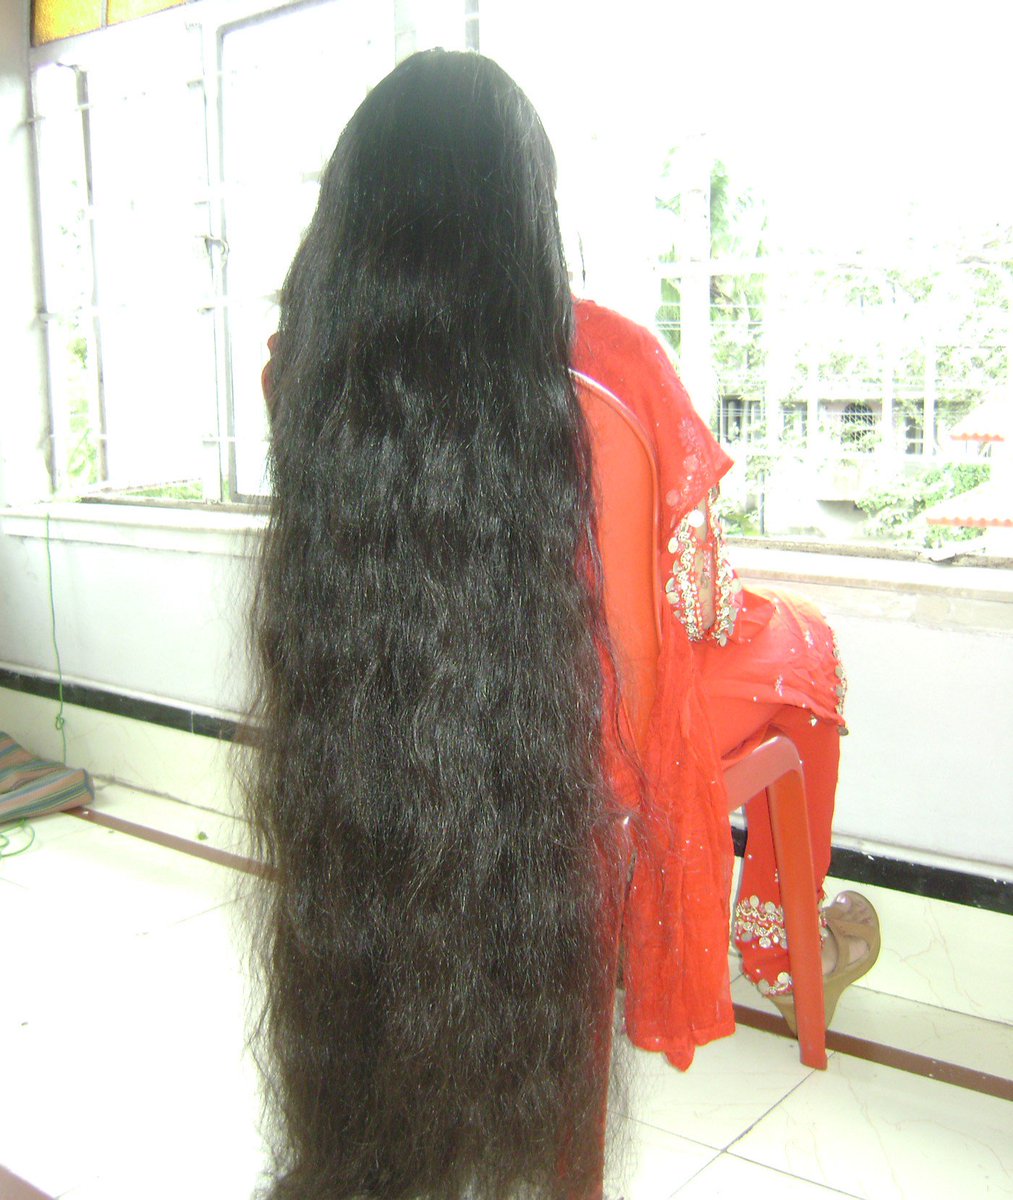 indianrapunzels on X: MOST BEAUTIFUL LONG HAIR VIDEOS & PHOTOS WITH PAYTM  APPLY COUPON lh4 & GET 4 FREE WITH 2 t.co4MrpUoYjNs # indianrapunzels #longhair #hair #longhairvideos #longhairbrushing  #paytmkaro t.coyO1E6BwwpW  X